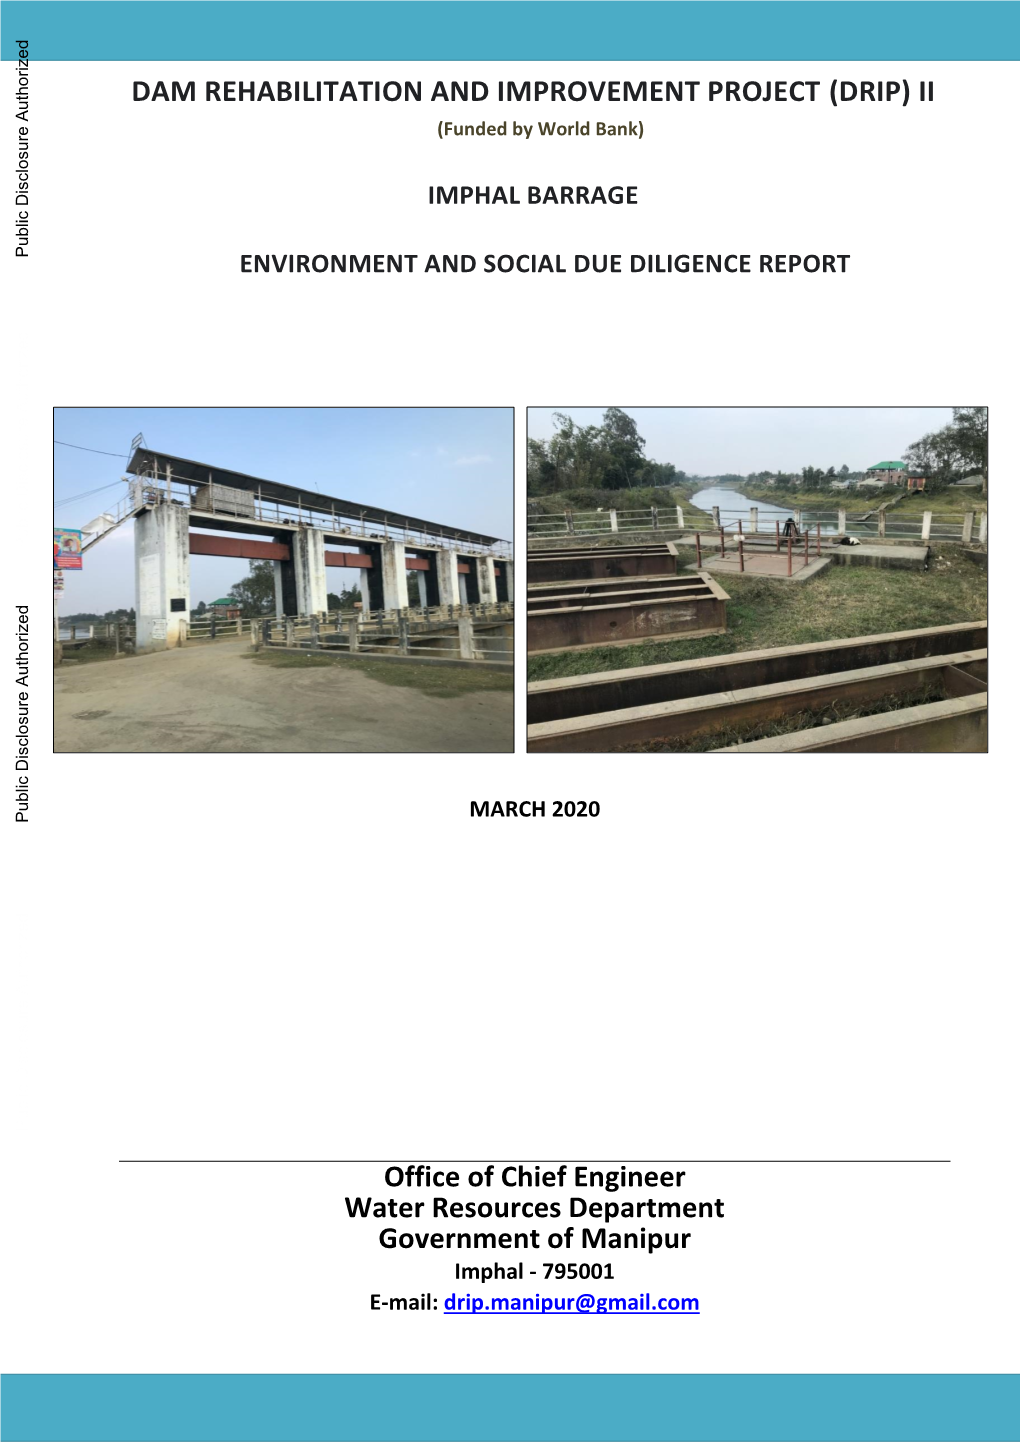 Imphal Barrage Environment and Social Due